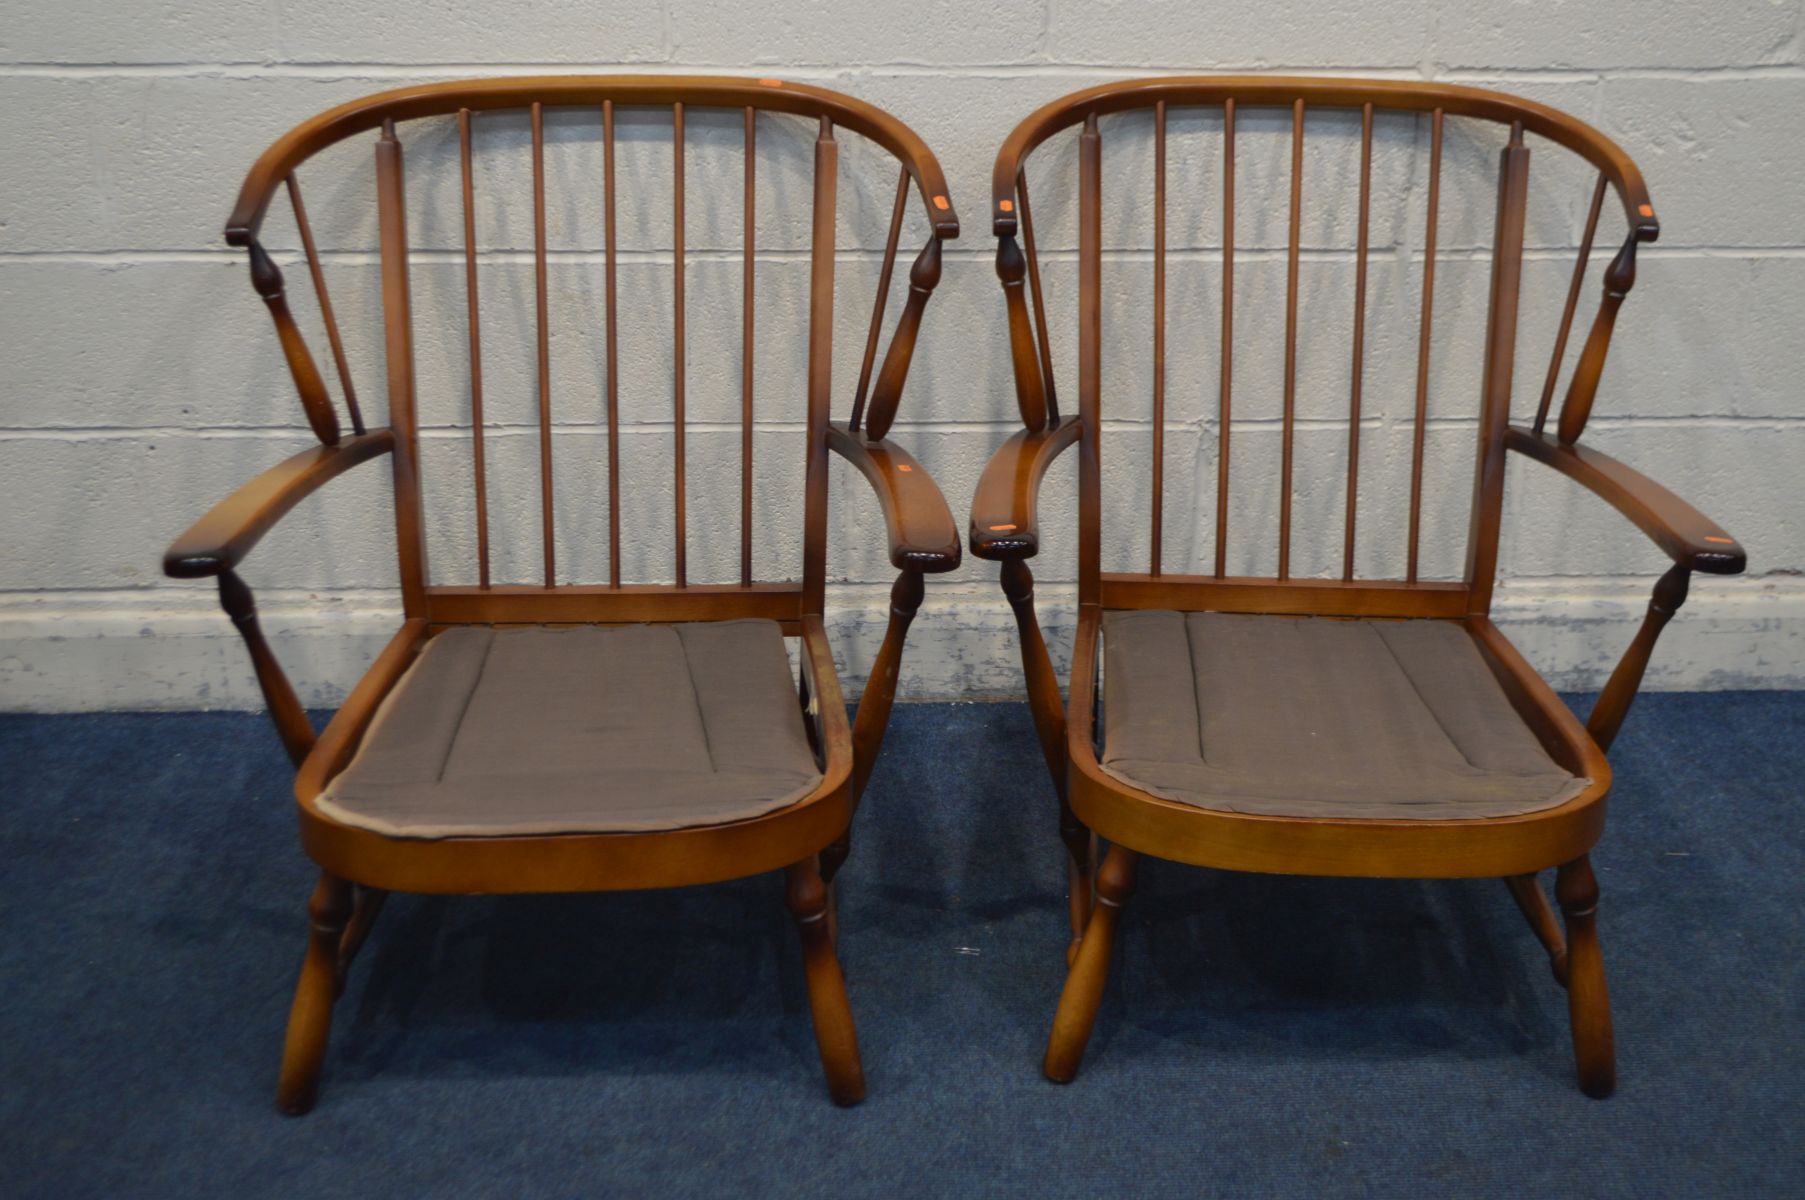 A PAIR OF MID TO LATE 20TH CENTURY BEECH SPINDLE BACK ARMCHAIRS (no cushions)